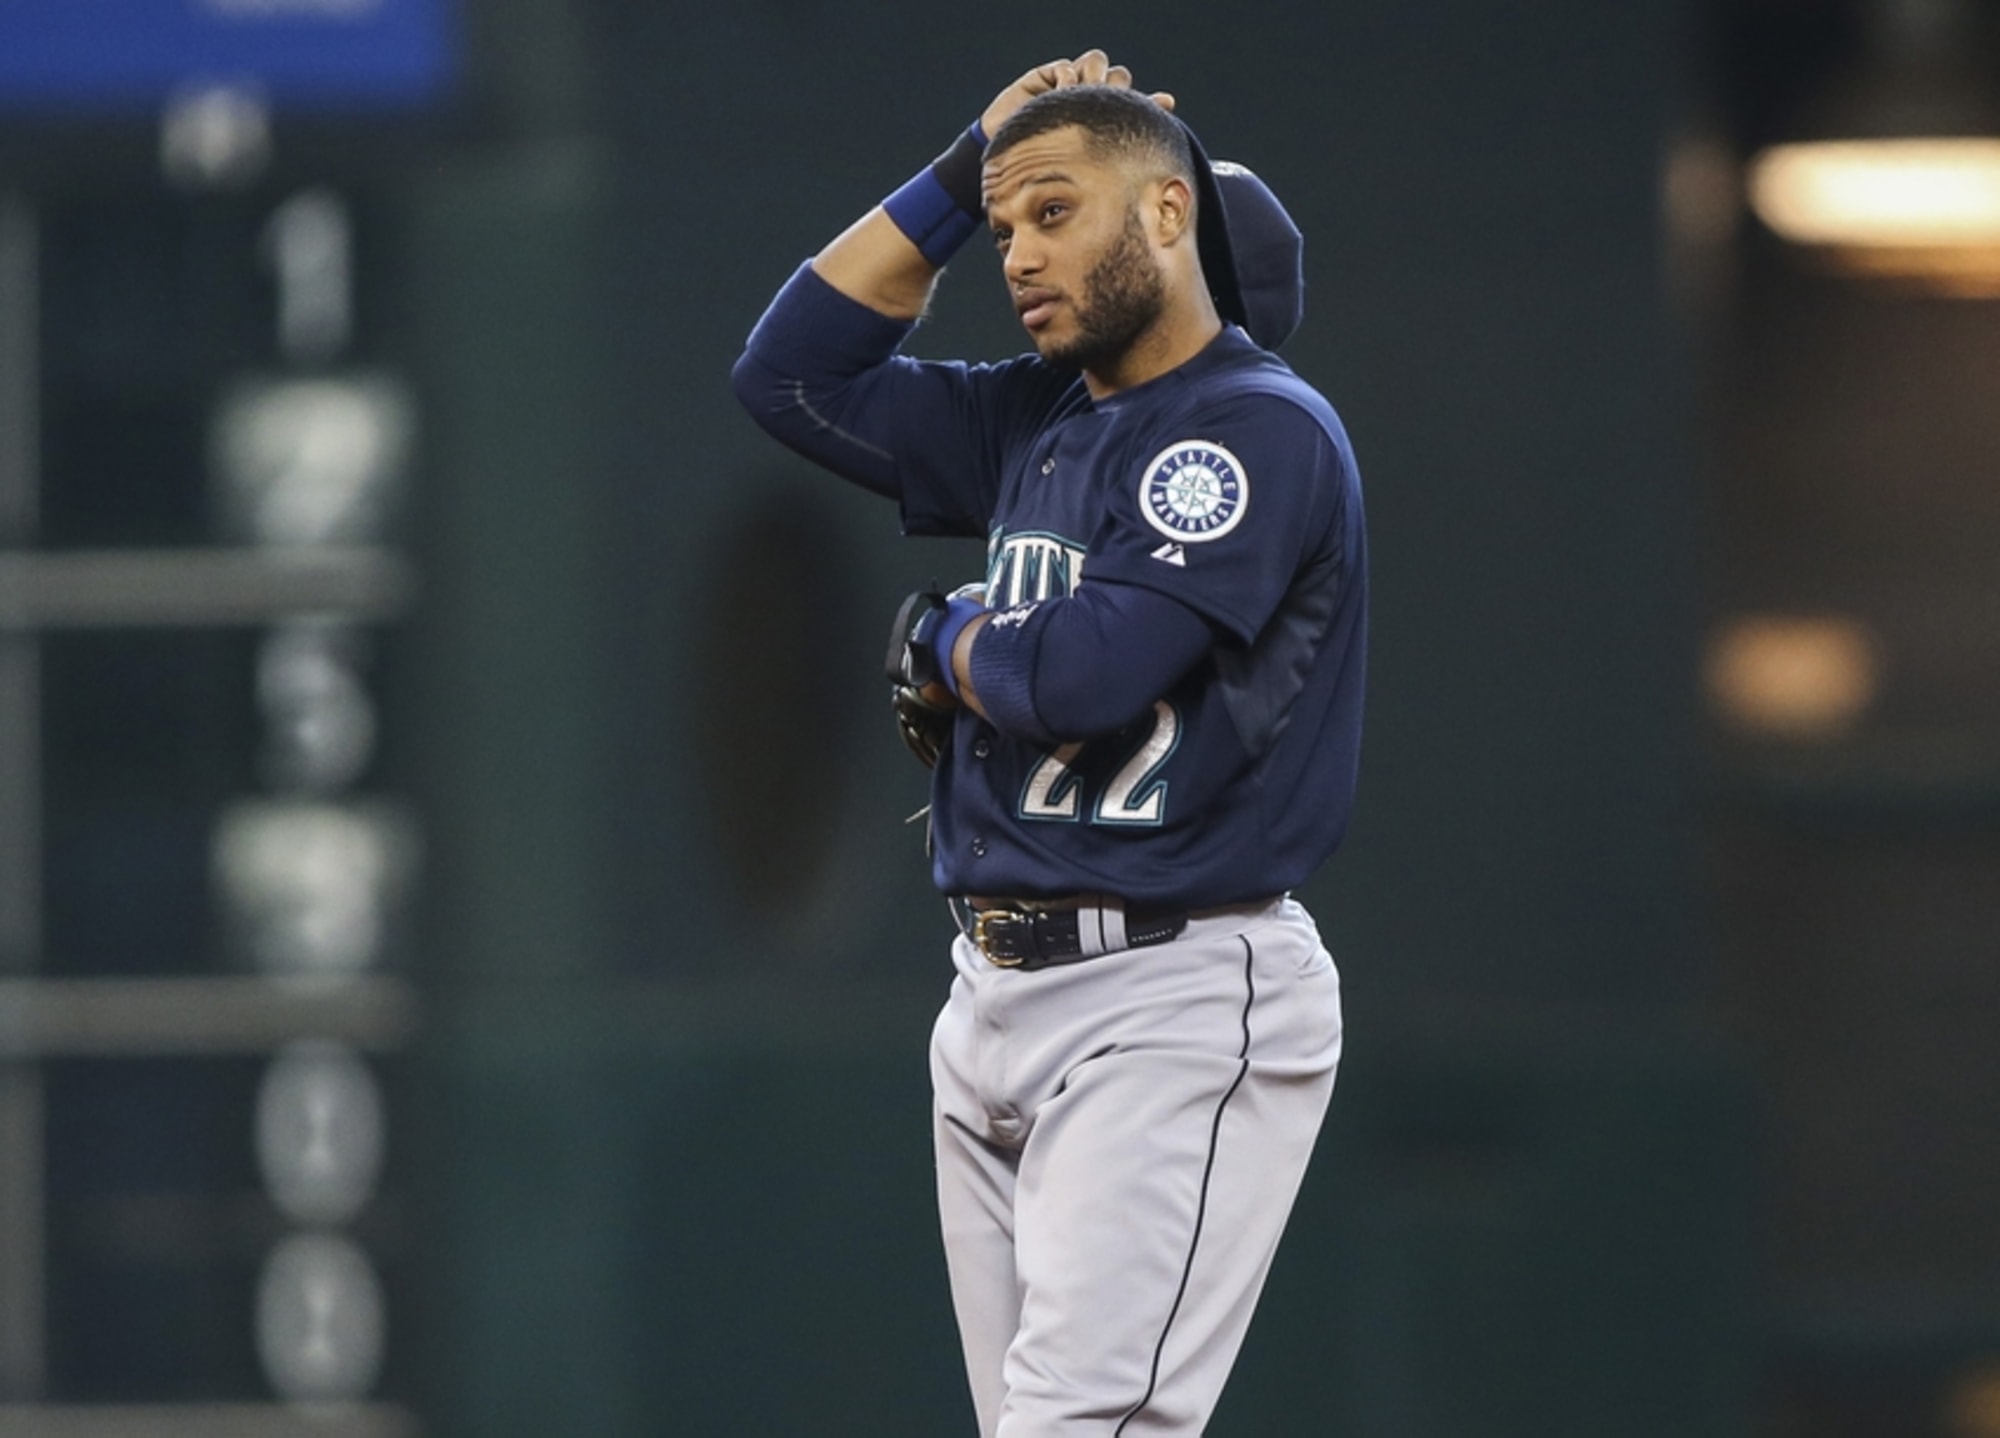 Mariners lose Cano to 80-game suspension